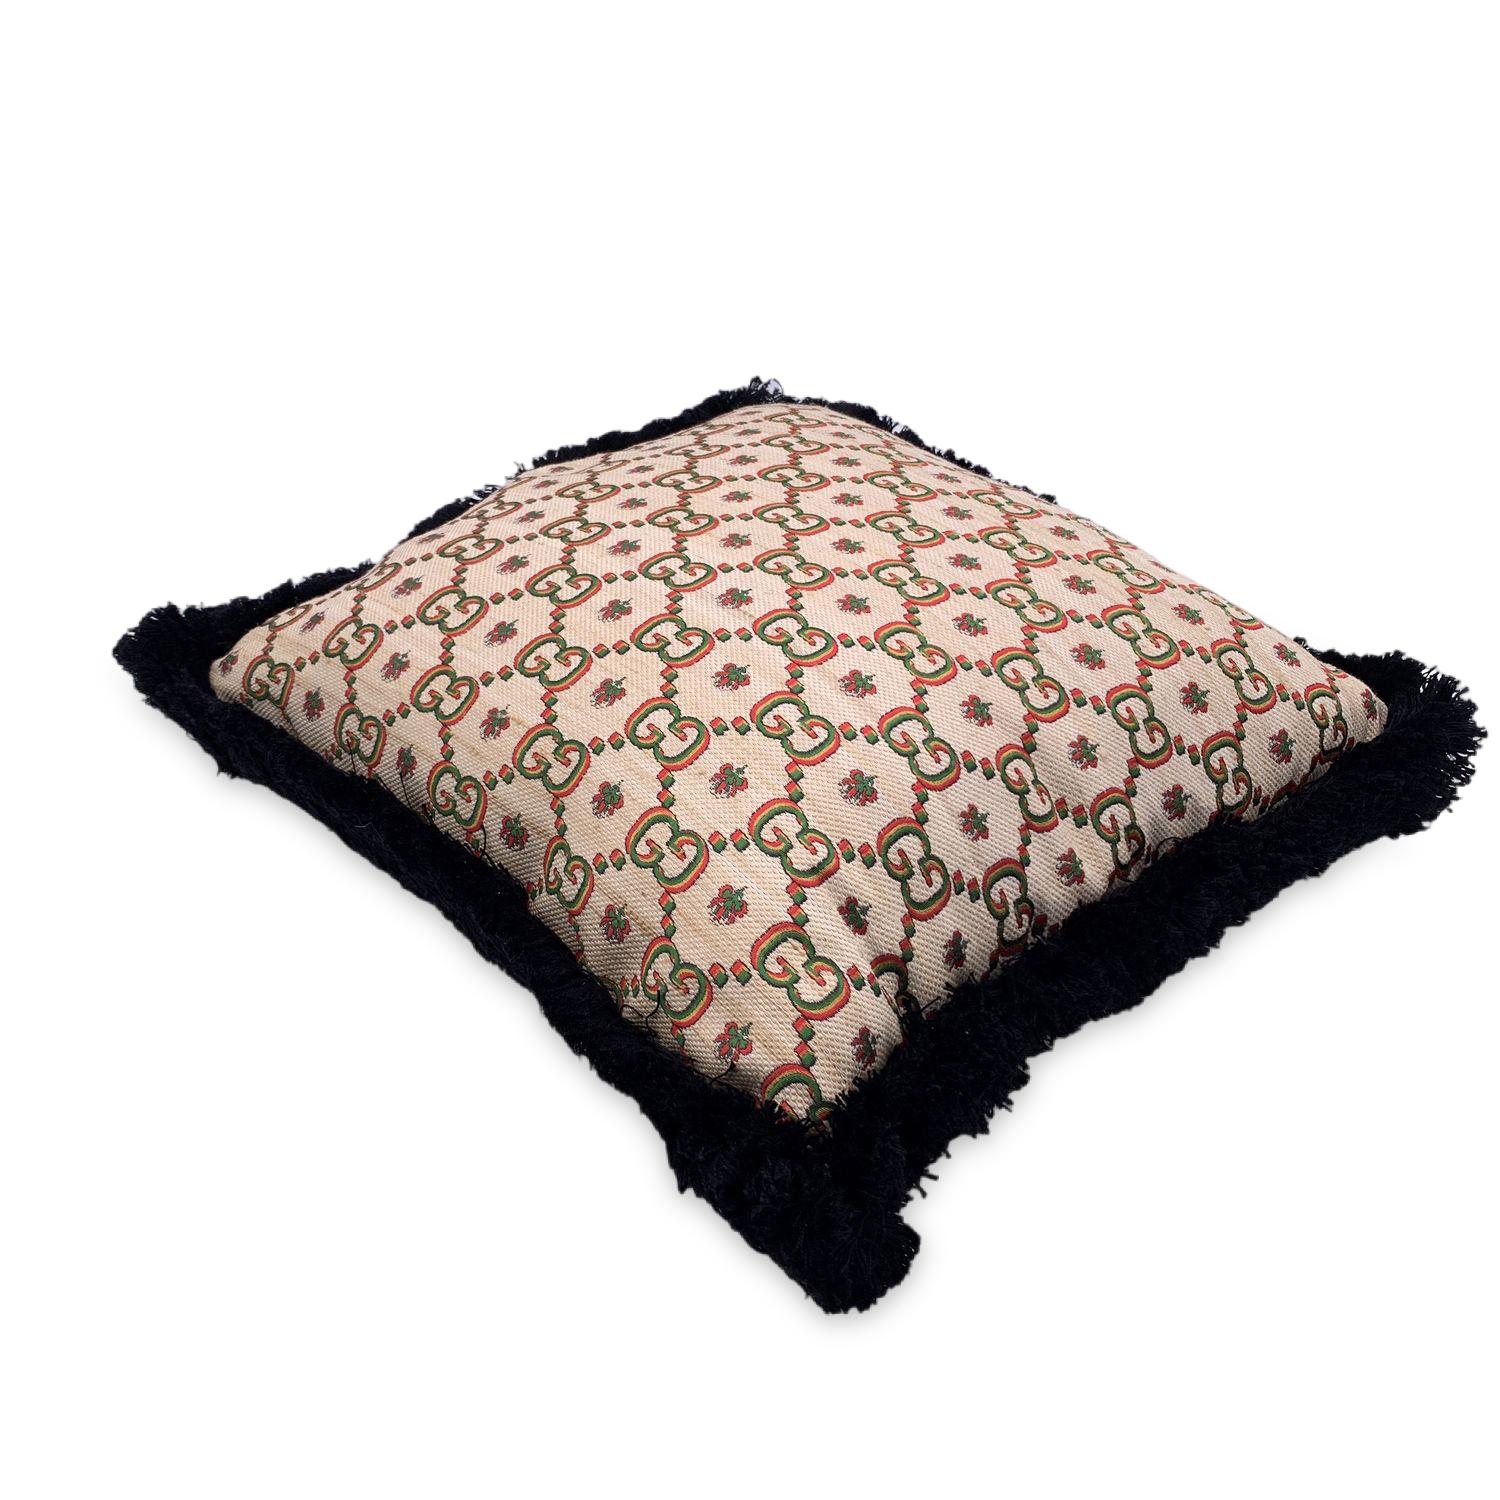 Beutiful GUCCI Cushion in beige and yellow with all-over multicolour embroidered GG logo pattern. Black frayed edges. Model with Gucci label sewn on the back. Front part: 44% Polyester, 32% Tussah Silk, 9% Silk, 15% Cotton. Back part: 43% Viscose,